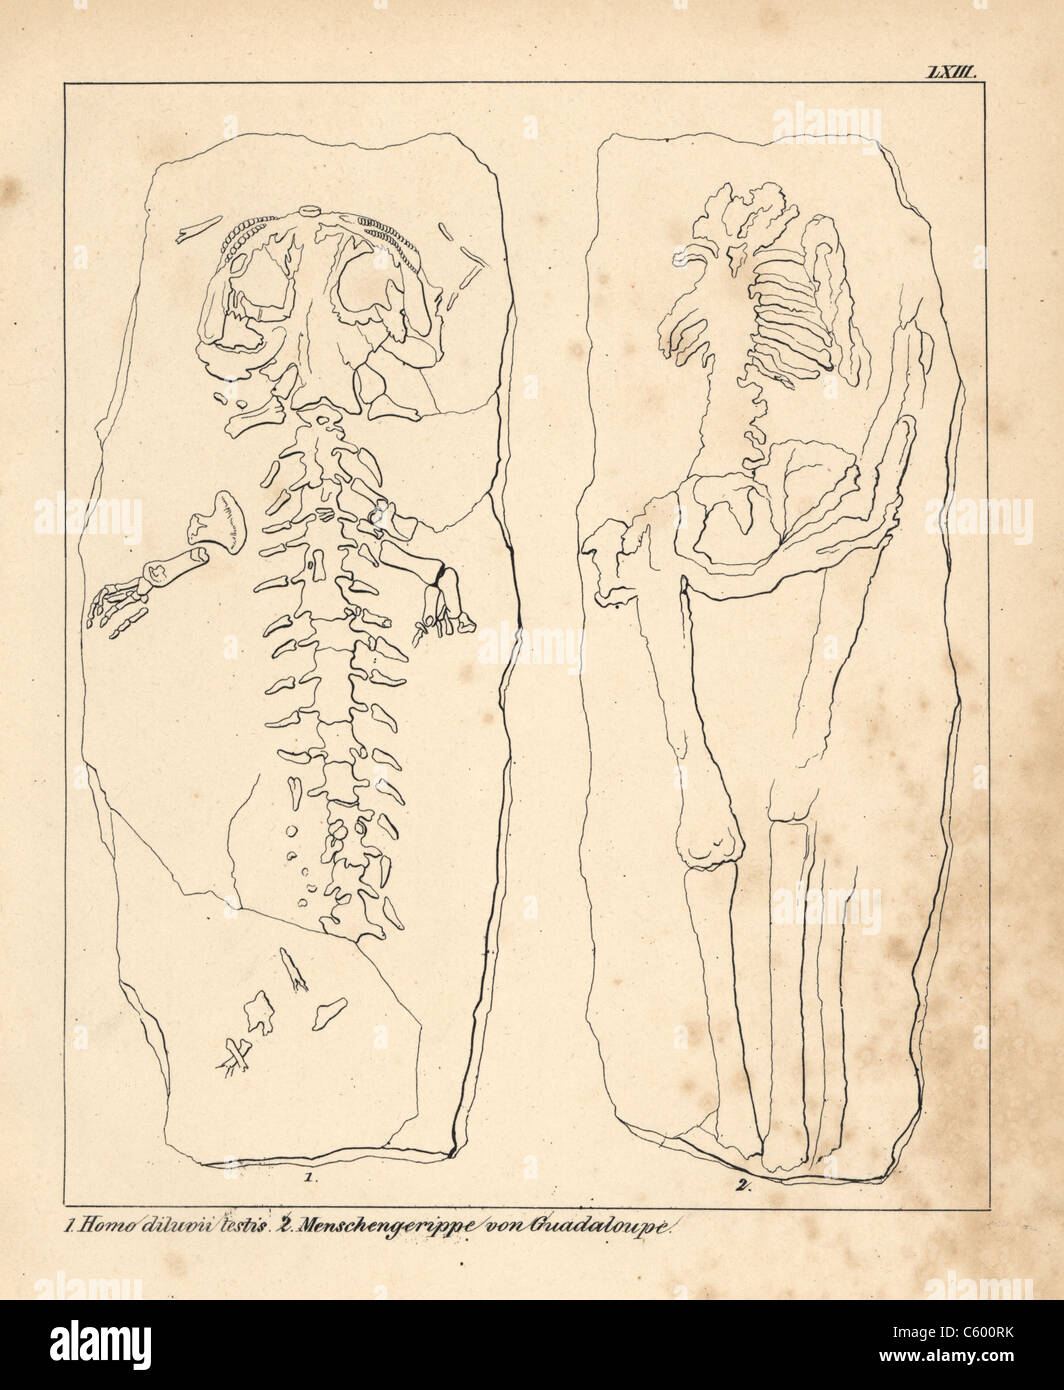 Homo diluvii testis skeleton fossil and Guadalupe man Stock Photo